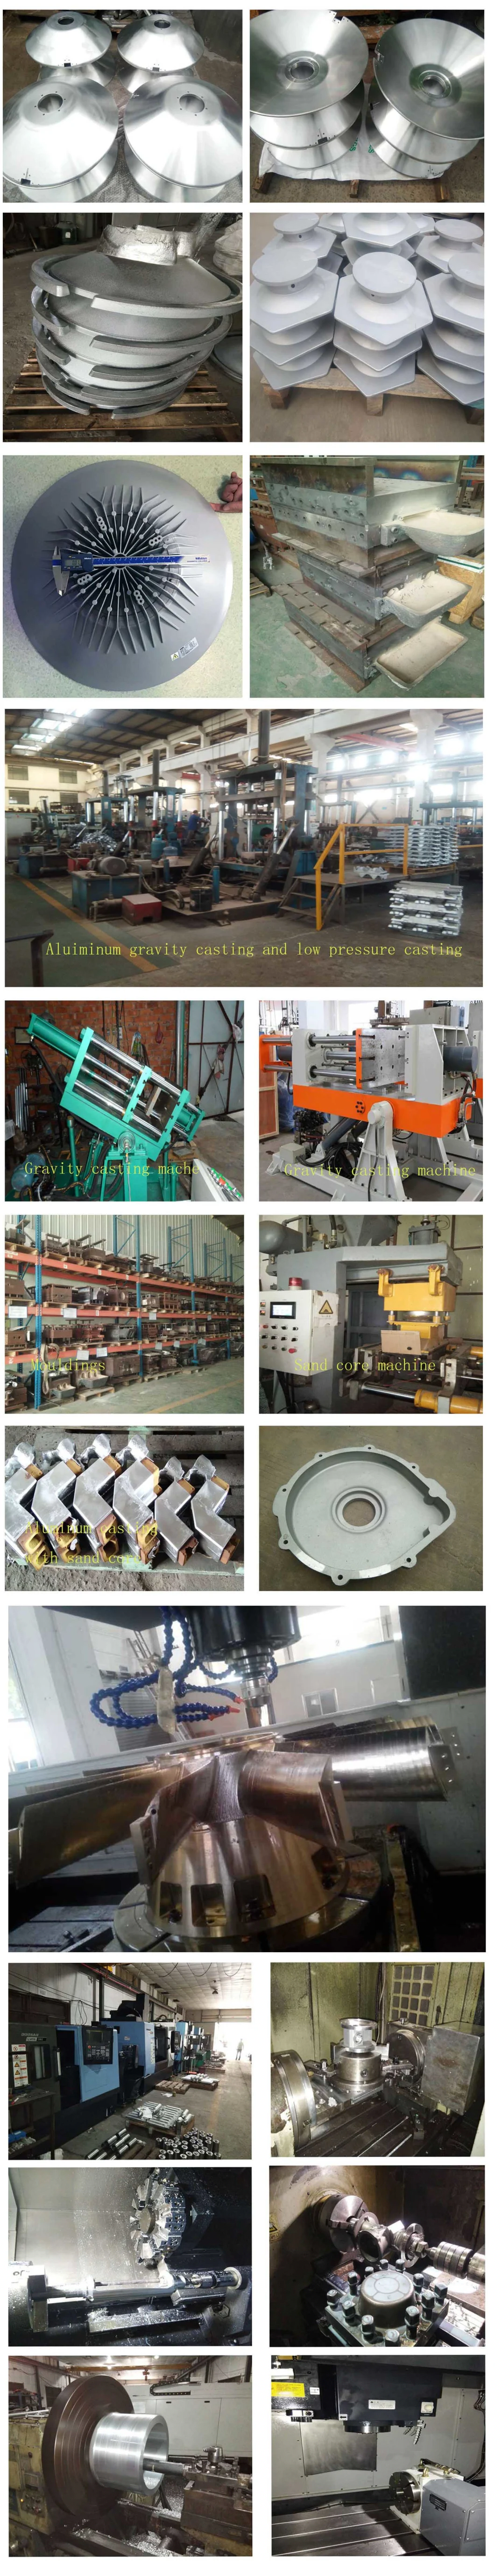 Aluminum Casting Pipe Fitting/Joints/Elbow/Machinery Parts Made by Gravity Casting/Low Pressure Casting